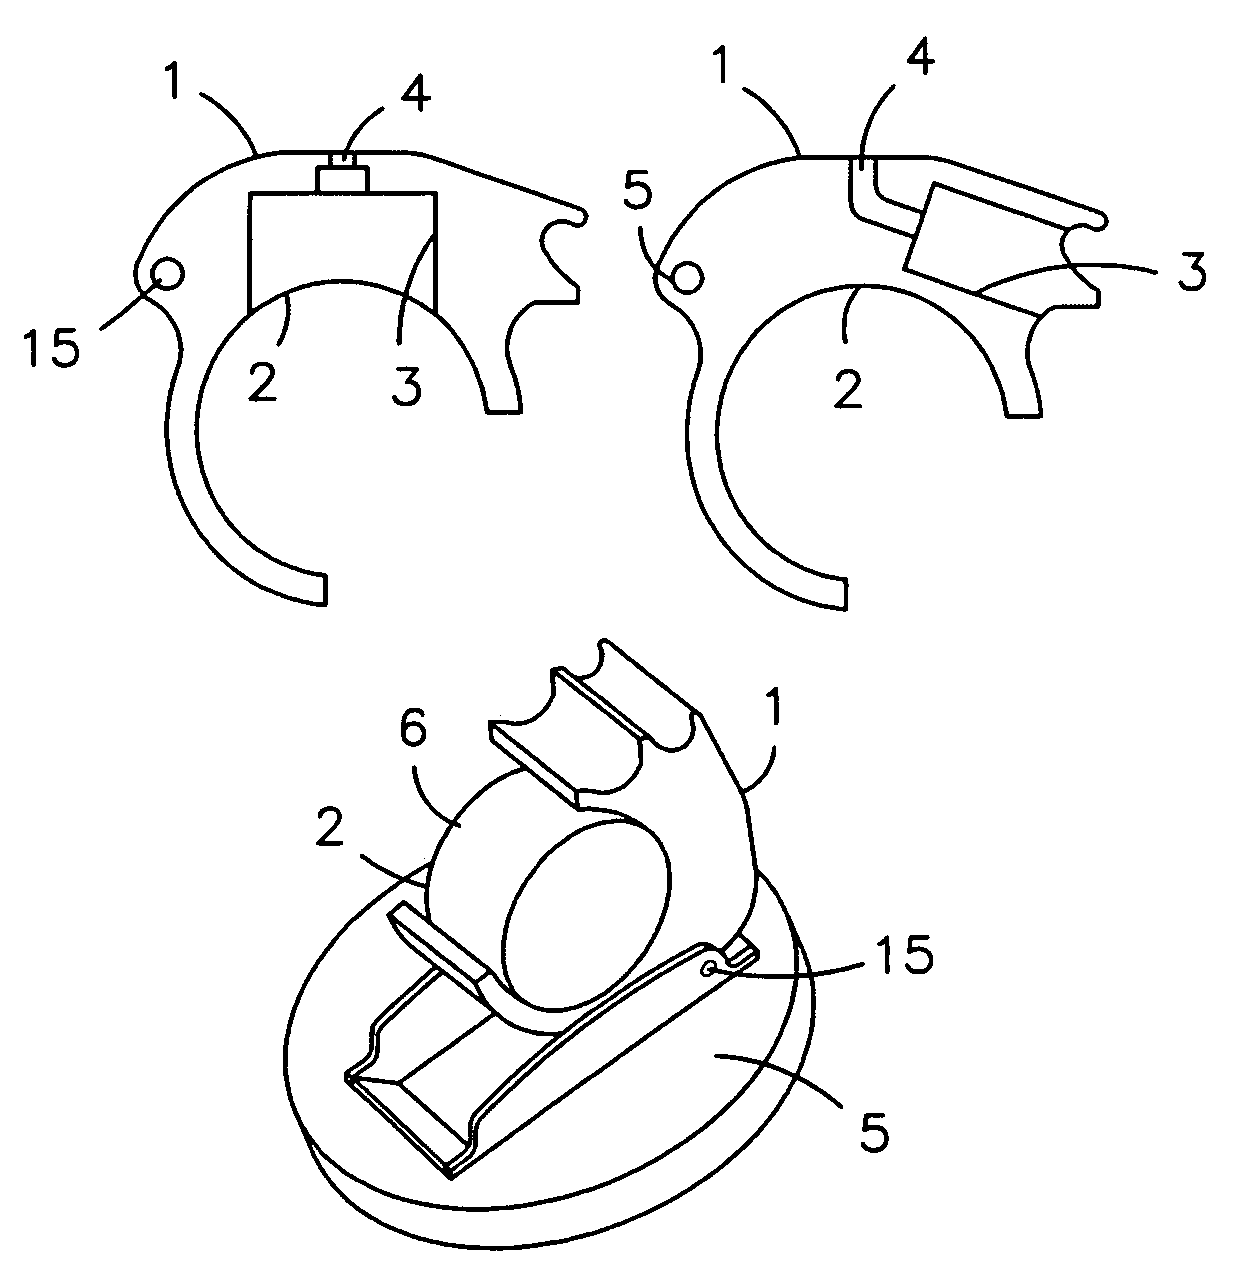 Hearing aid with a microphone in the battery compartment lid